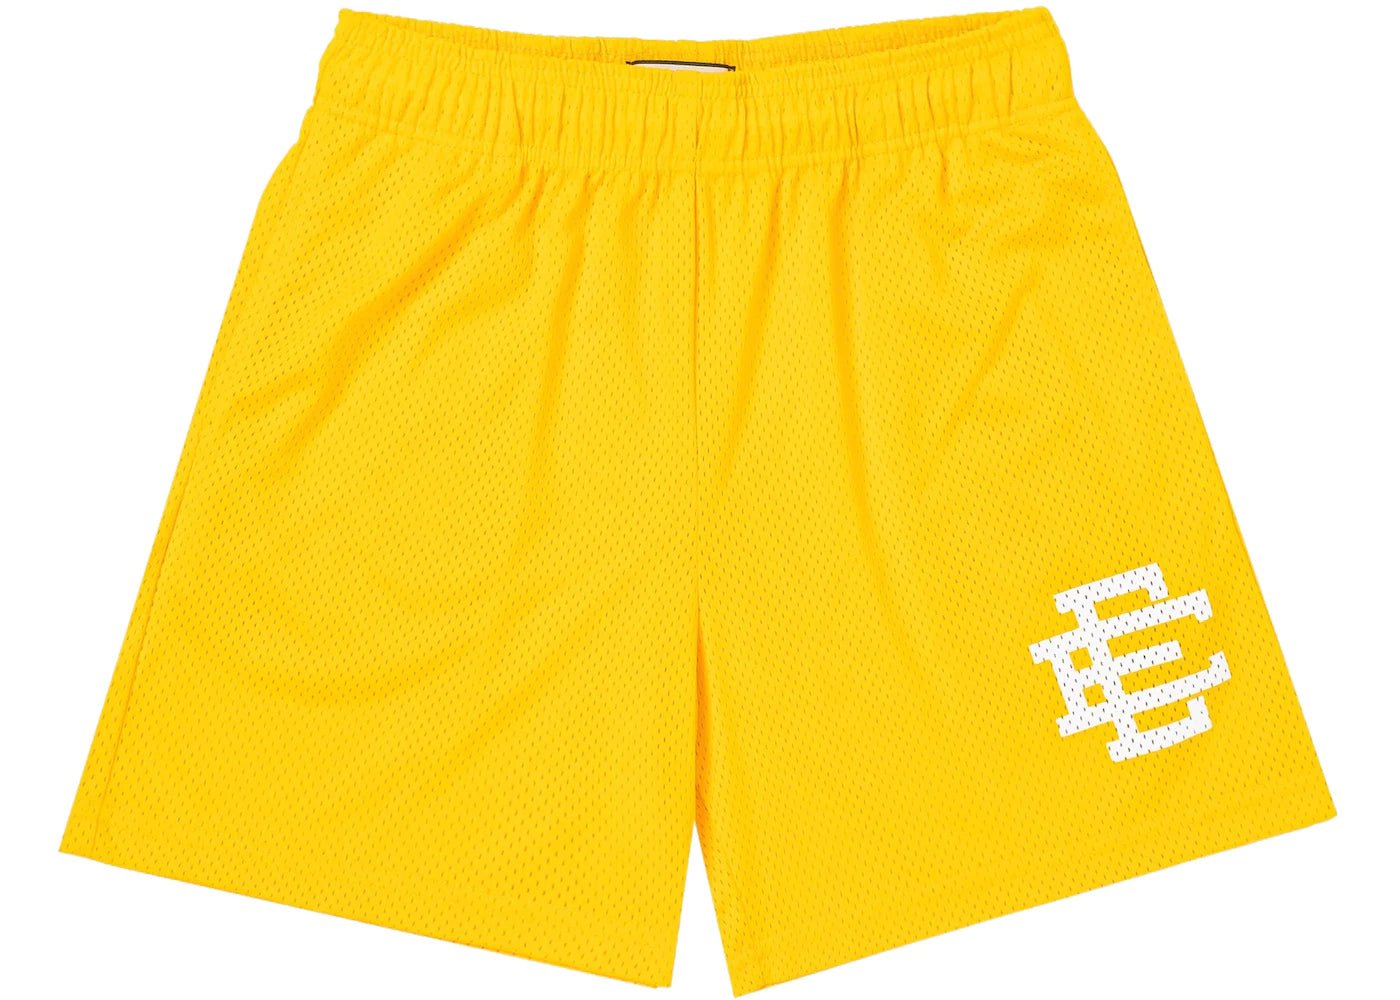 Eric Emanuel EE Shorts - Yellow - Shorts - Eric Emanuel - Jawns on Fire - sneakers